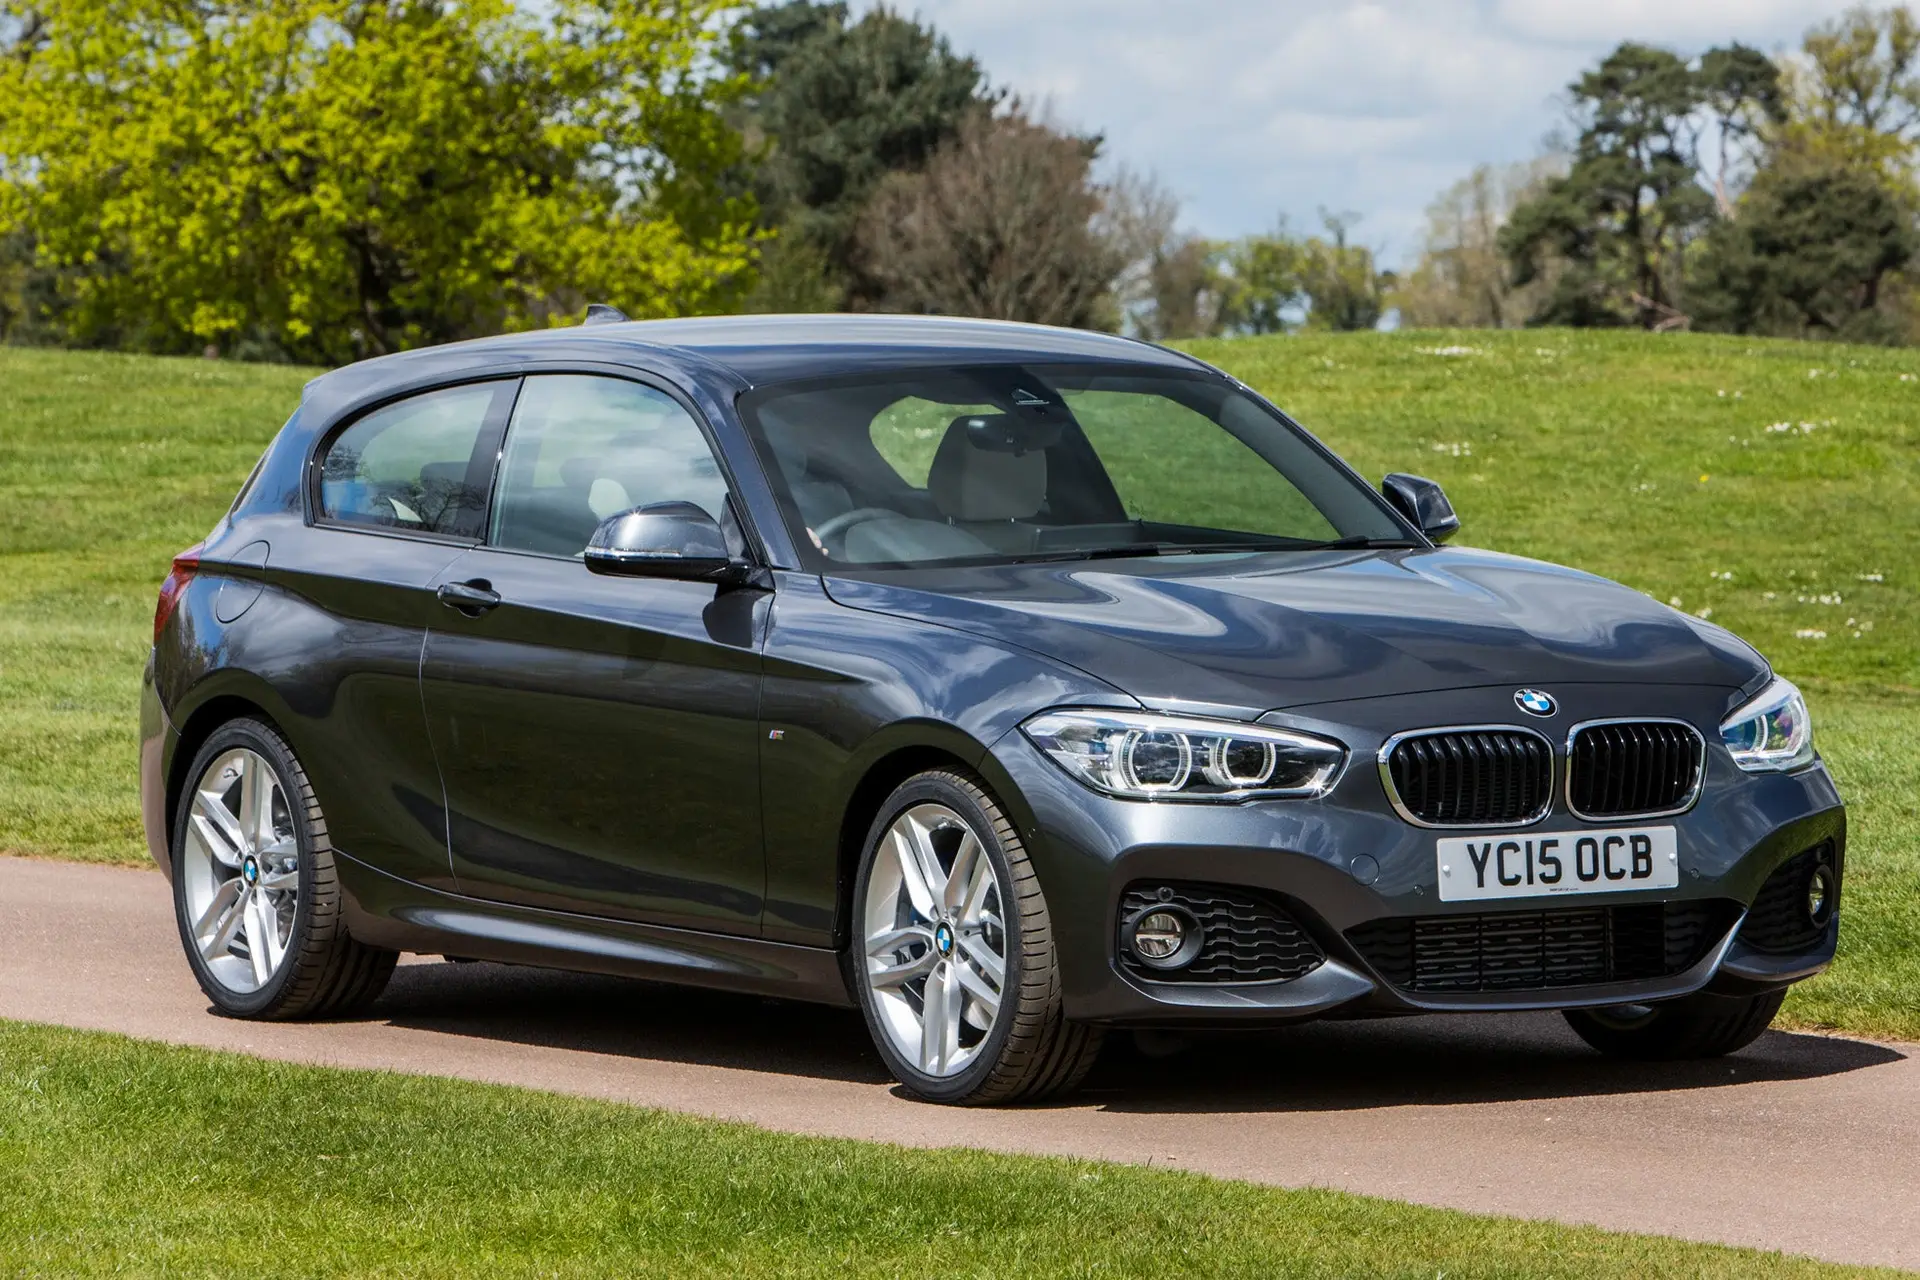 BMW 1 Series (2011-2019) Review: exterior front three quarter photo of the BMW 1 Series 